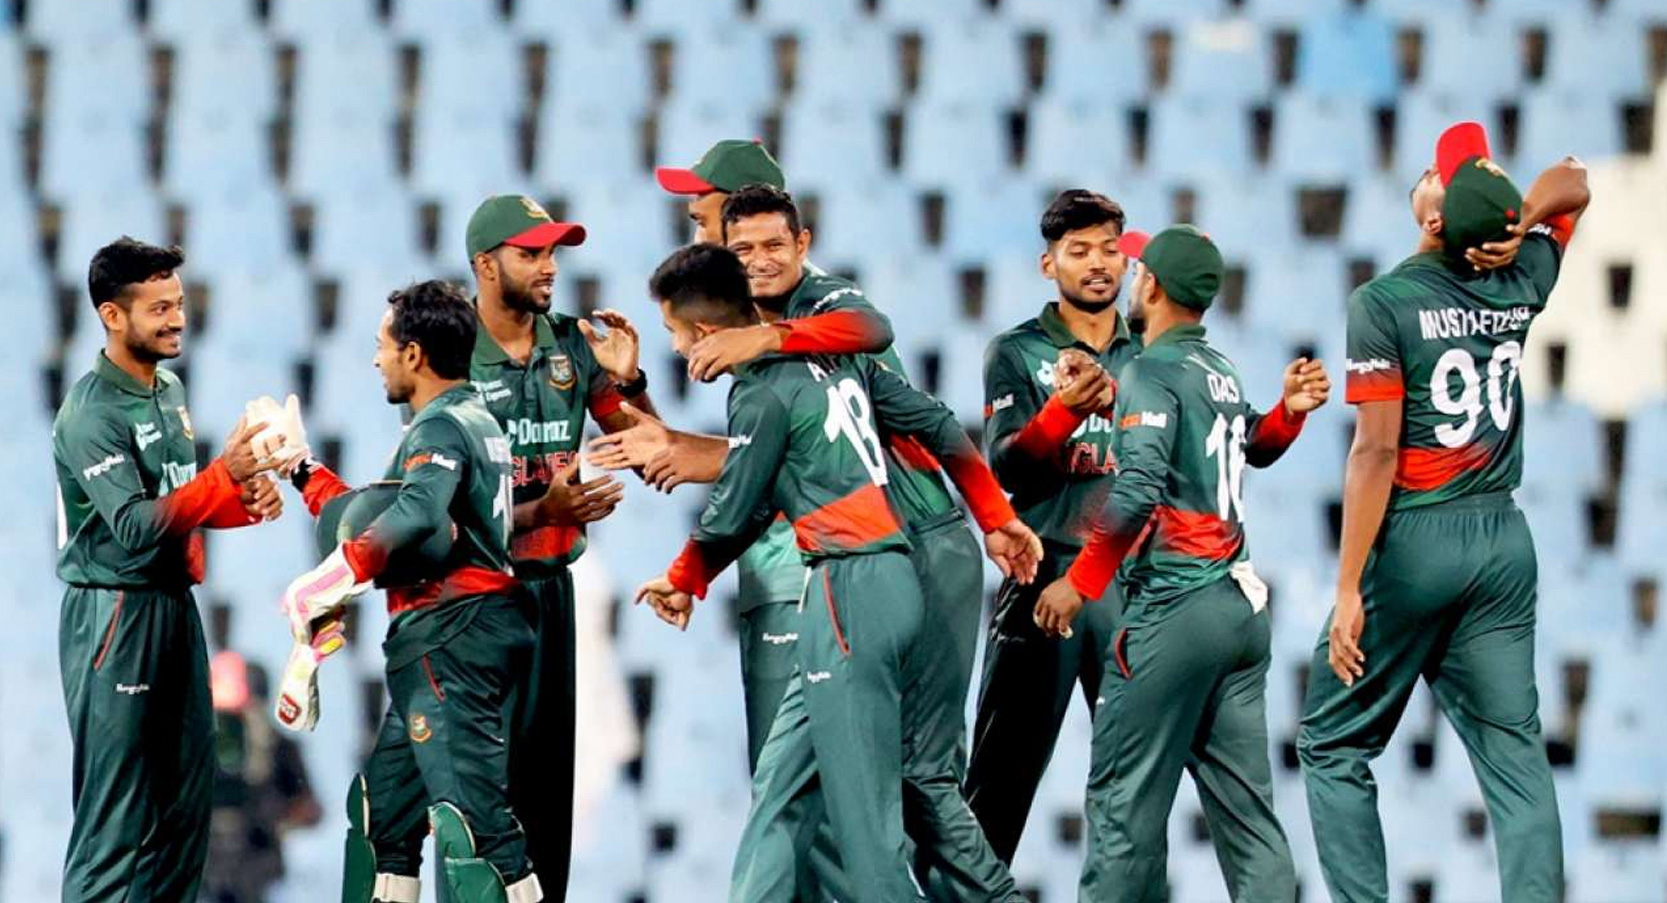 Bangladesh defeats South Africa in an ODI format in their home ground for the first time!